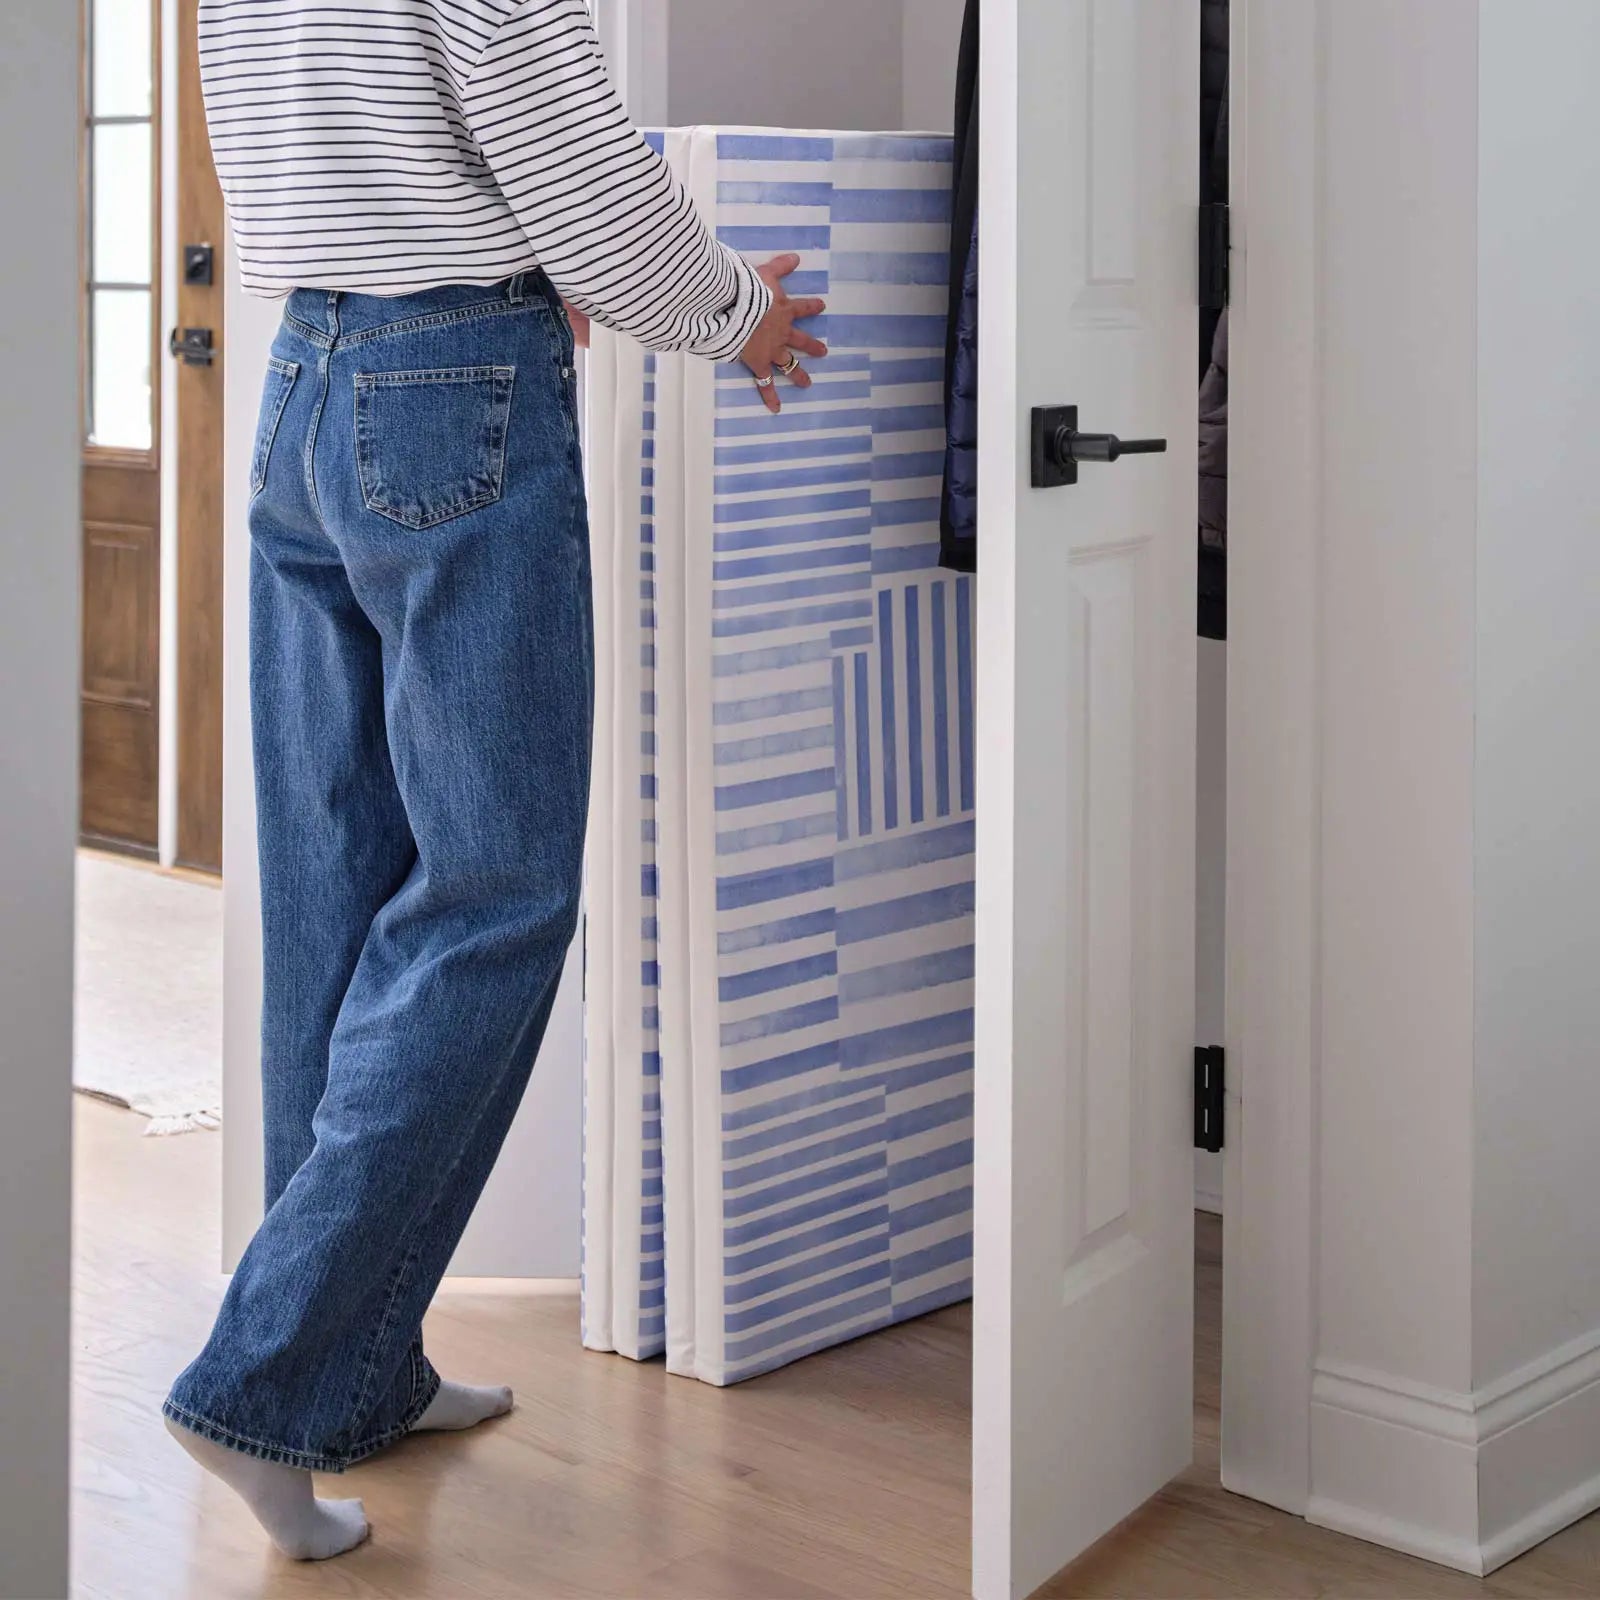 French blue and white inverted stripe tumbling mat shown folded with a woman putting it in a closet